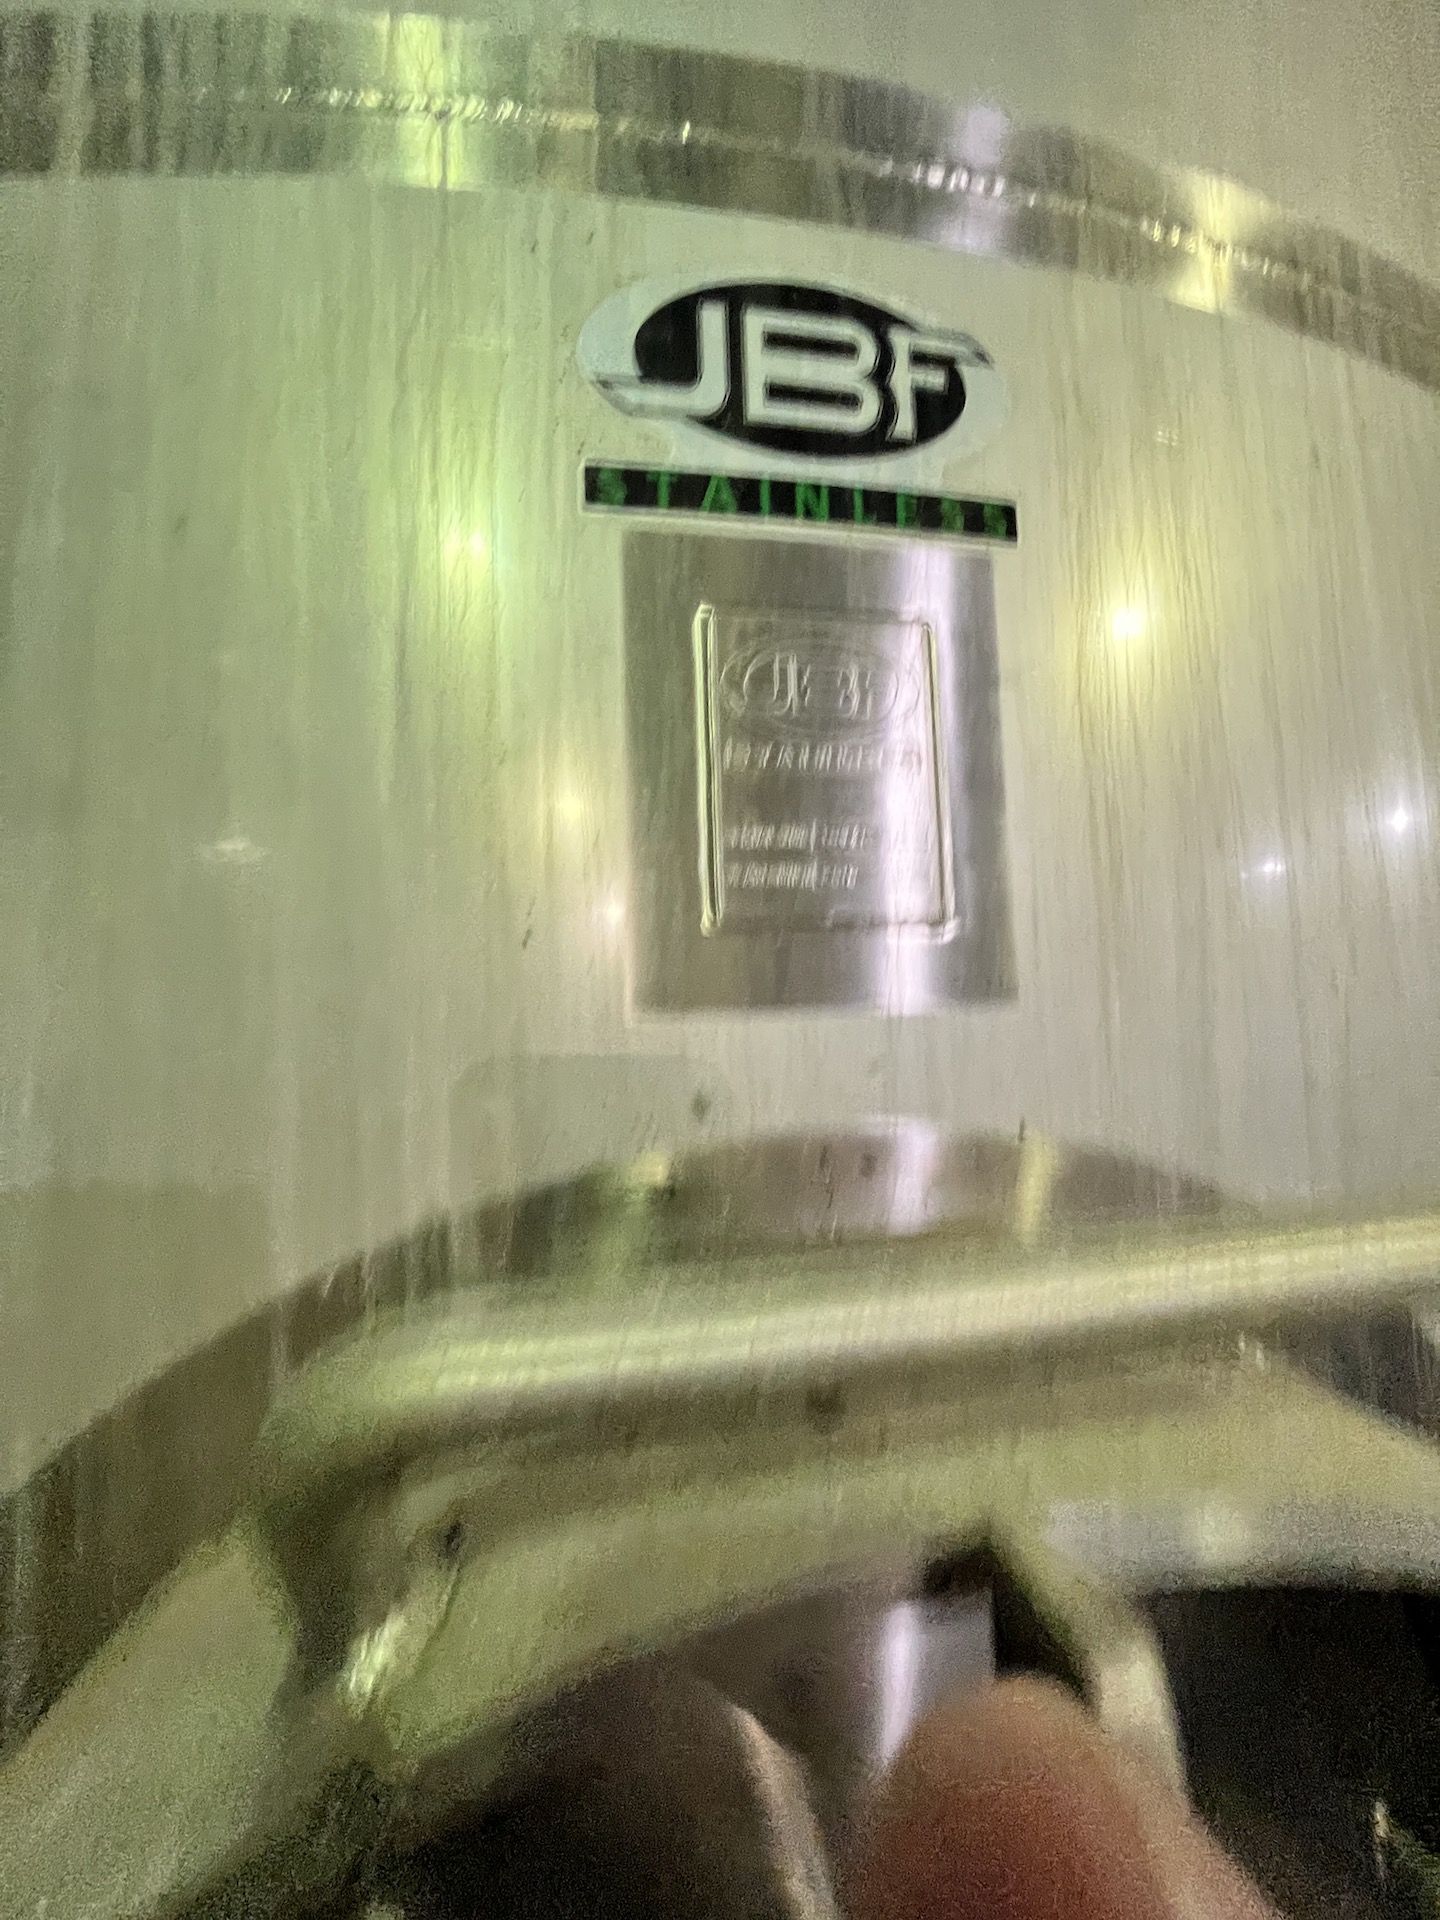 2019 JBF 3,780 GALLON S/S MIXING TANK, S/N 19948, TOP-MOUNT PROP STYLE AGITATION, APPROX. 108 IN. - Image 4 of 20